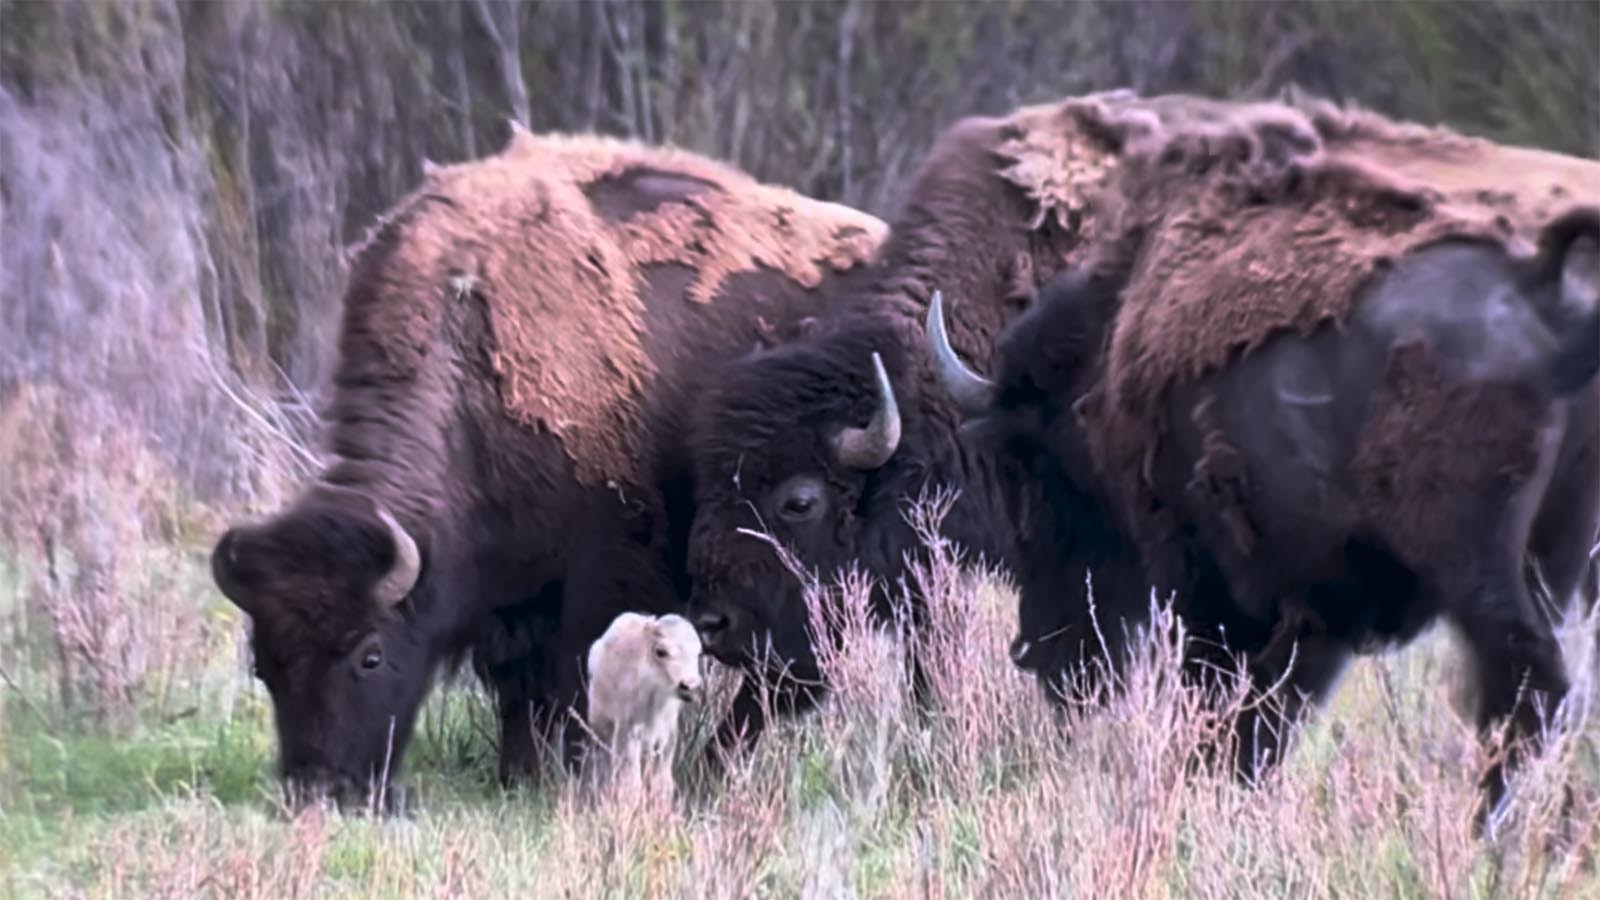 Retired biologist Gary Gaston was at just the right place at just the right time to capture this video of a rare white bison calf taking some of its first steps in Yellowstone National Park on June 4. There have been on confirmed sightings of the calf since.